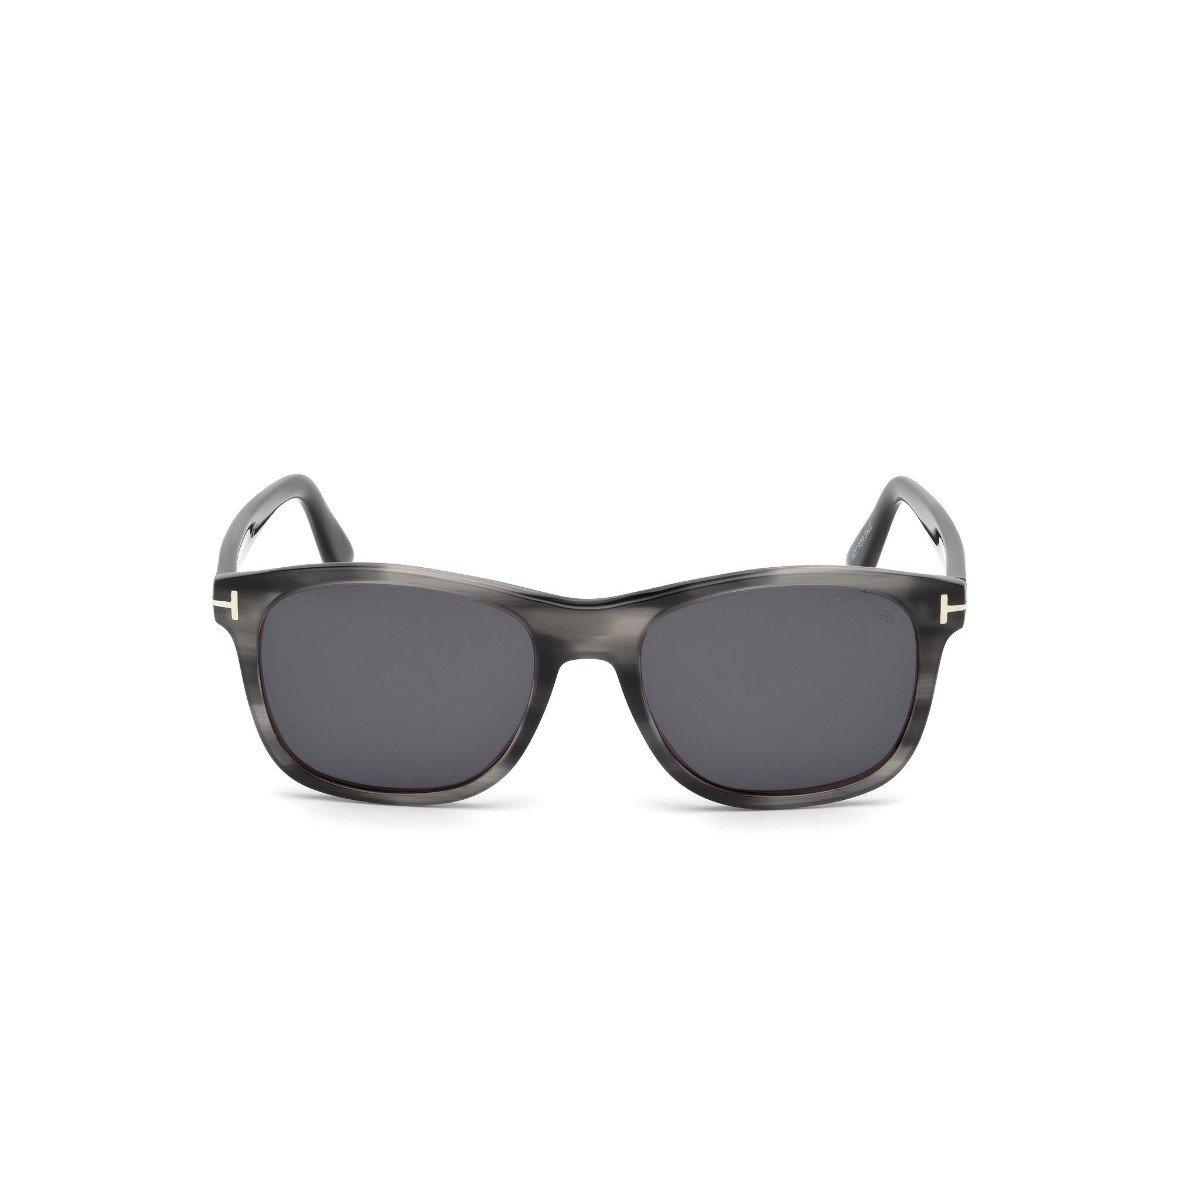 Tom Ford - TF595 20A Grey with Silver